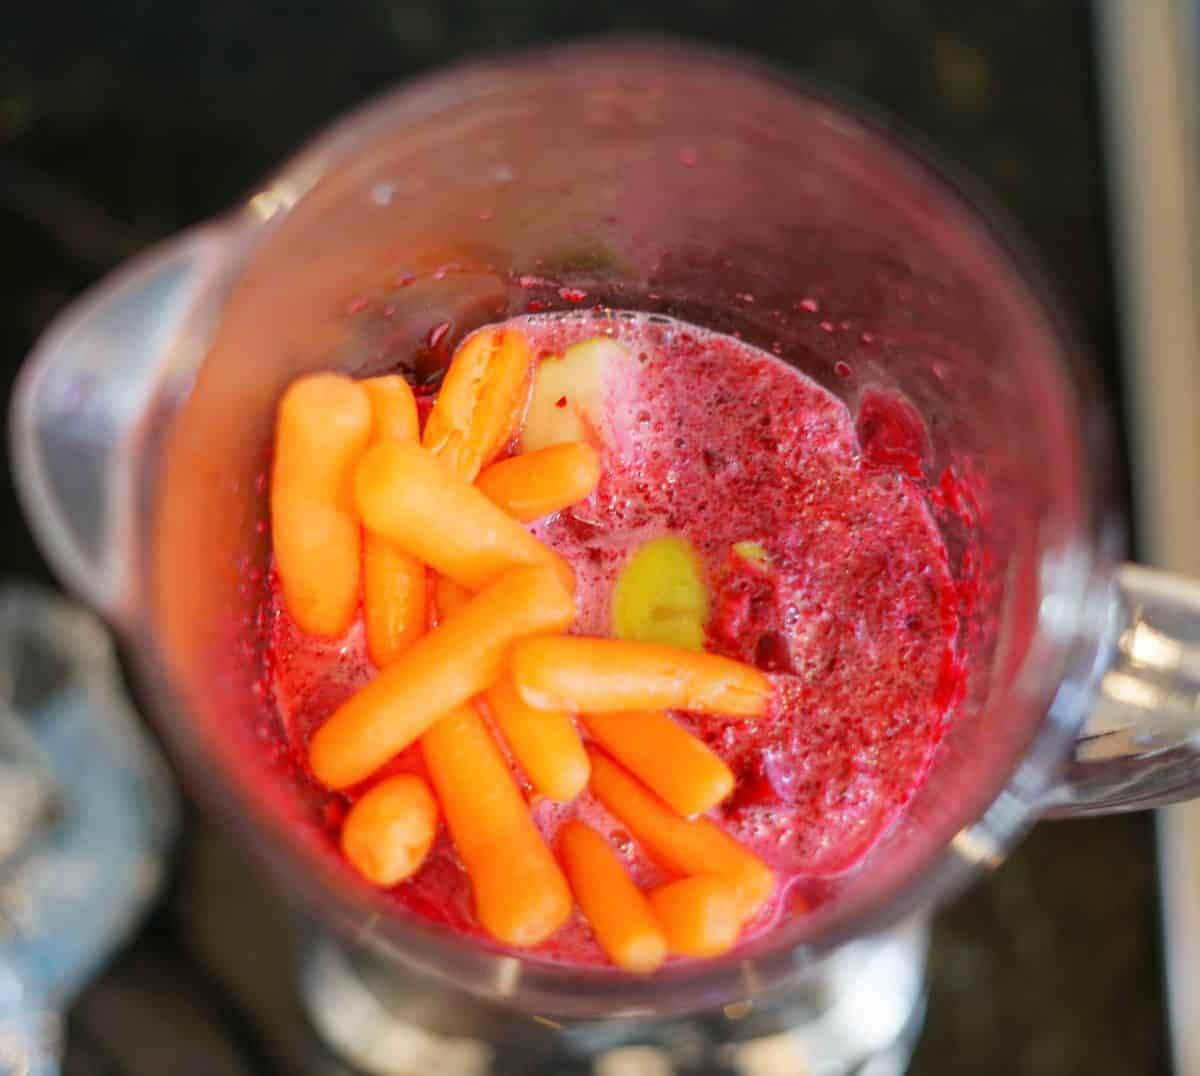 babyc carrots in a blender with a bright pink smoothie base.